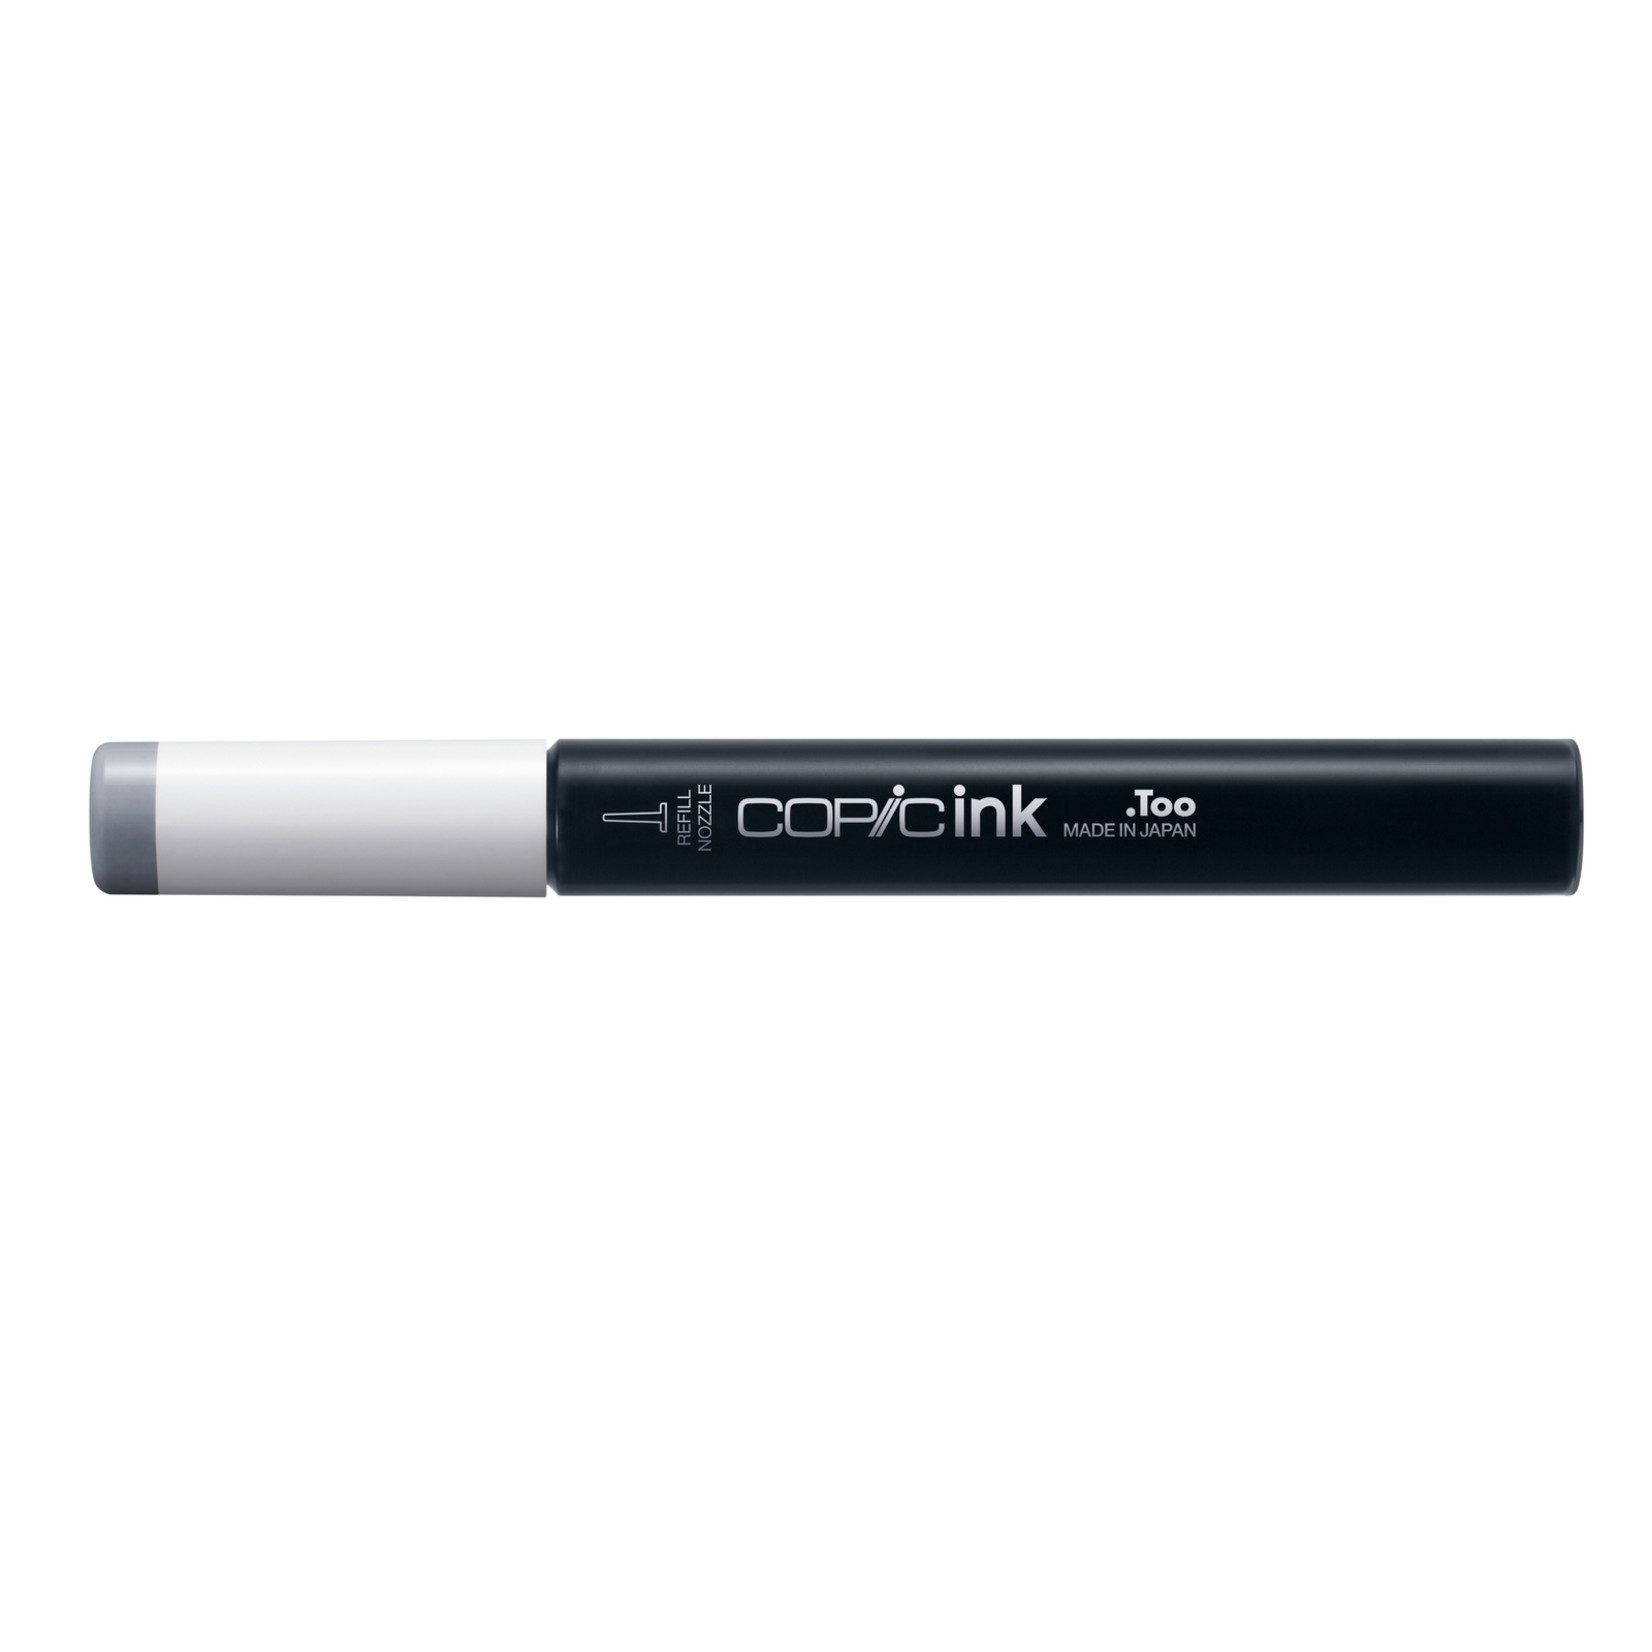 COPIC COPIC INK REFILL 12ML C6 COOL GRAY NO. 6